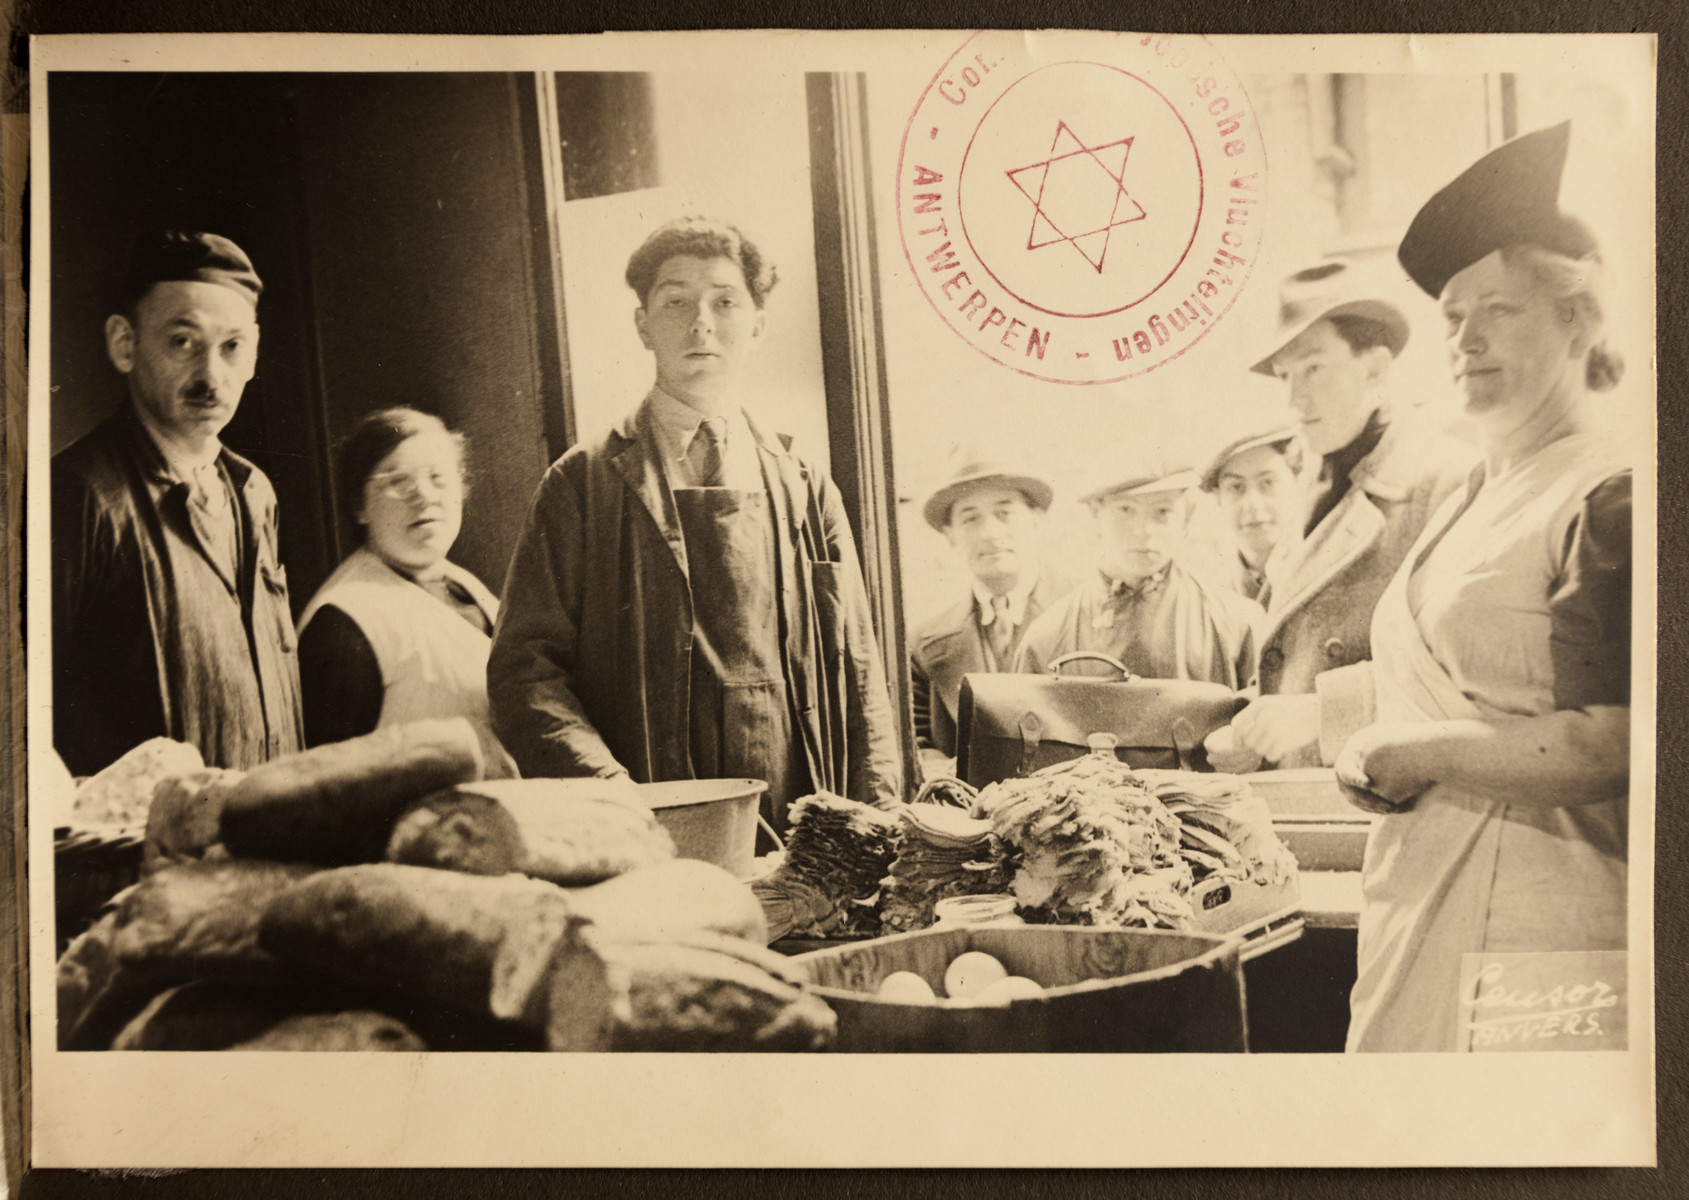 Kitchen workers of the Jewish Refugee Aid Committee of Antwerp distribute food.